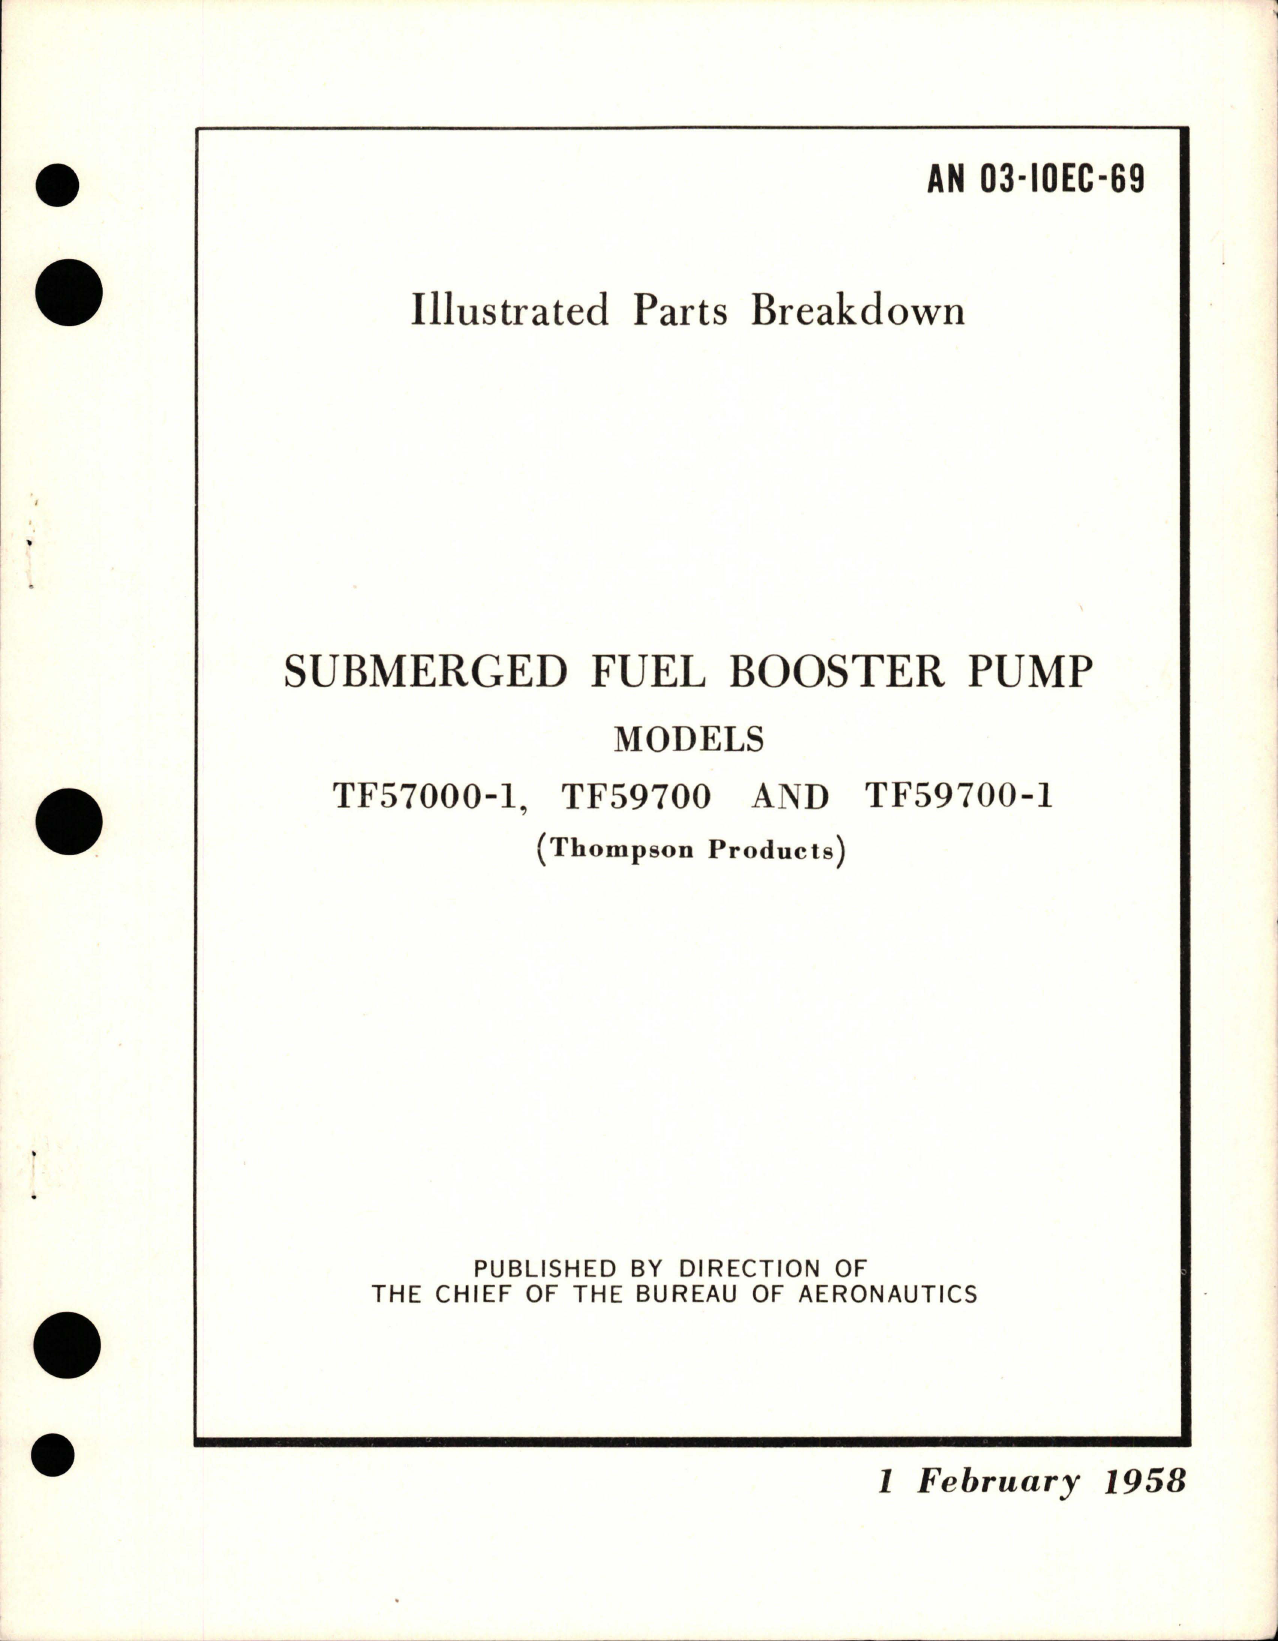 Sample page 1 from AirCorps Library document: Illustrated Parts Breakdown for Submerged Fuel Booster Pump - Models TF57000-1, TF59700, and TF59700-1